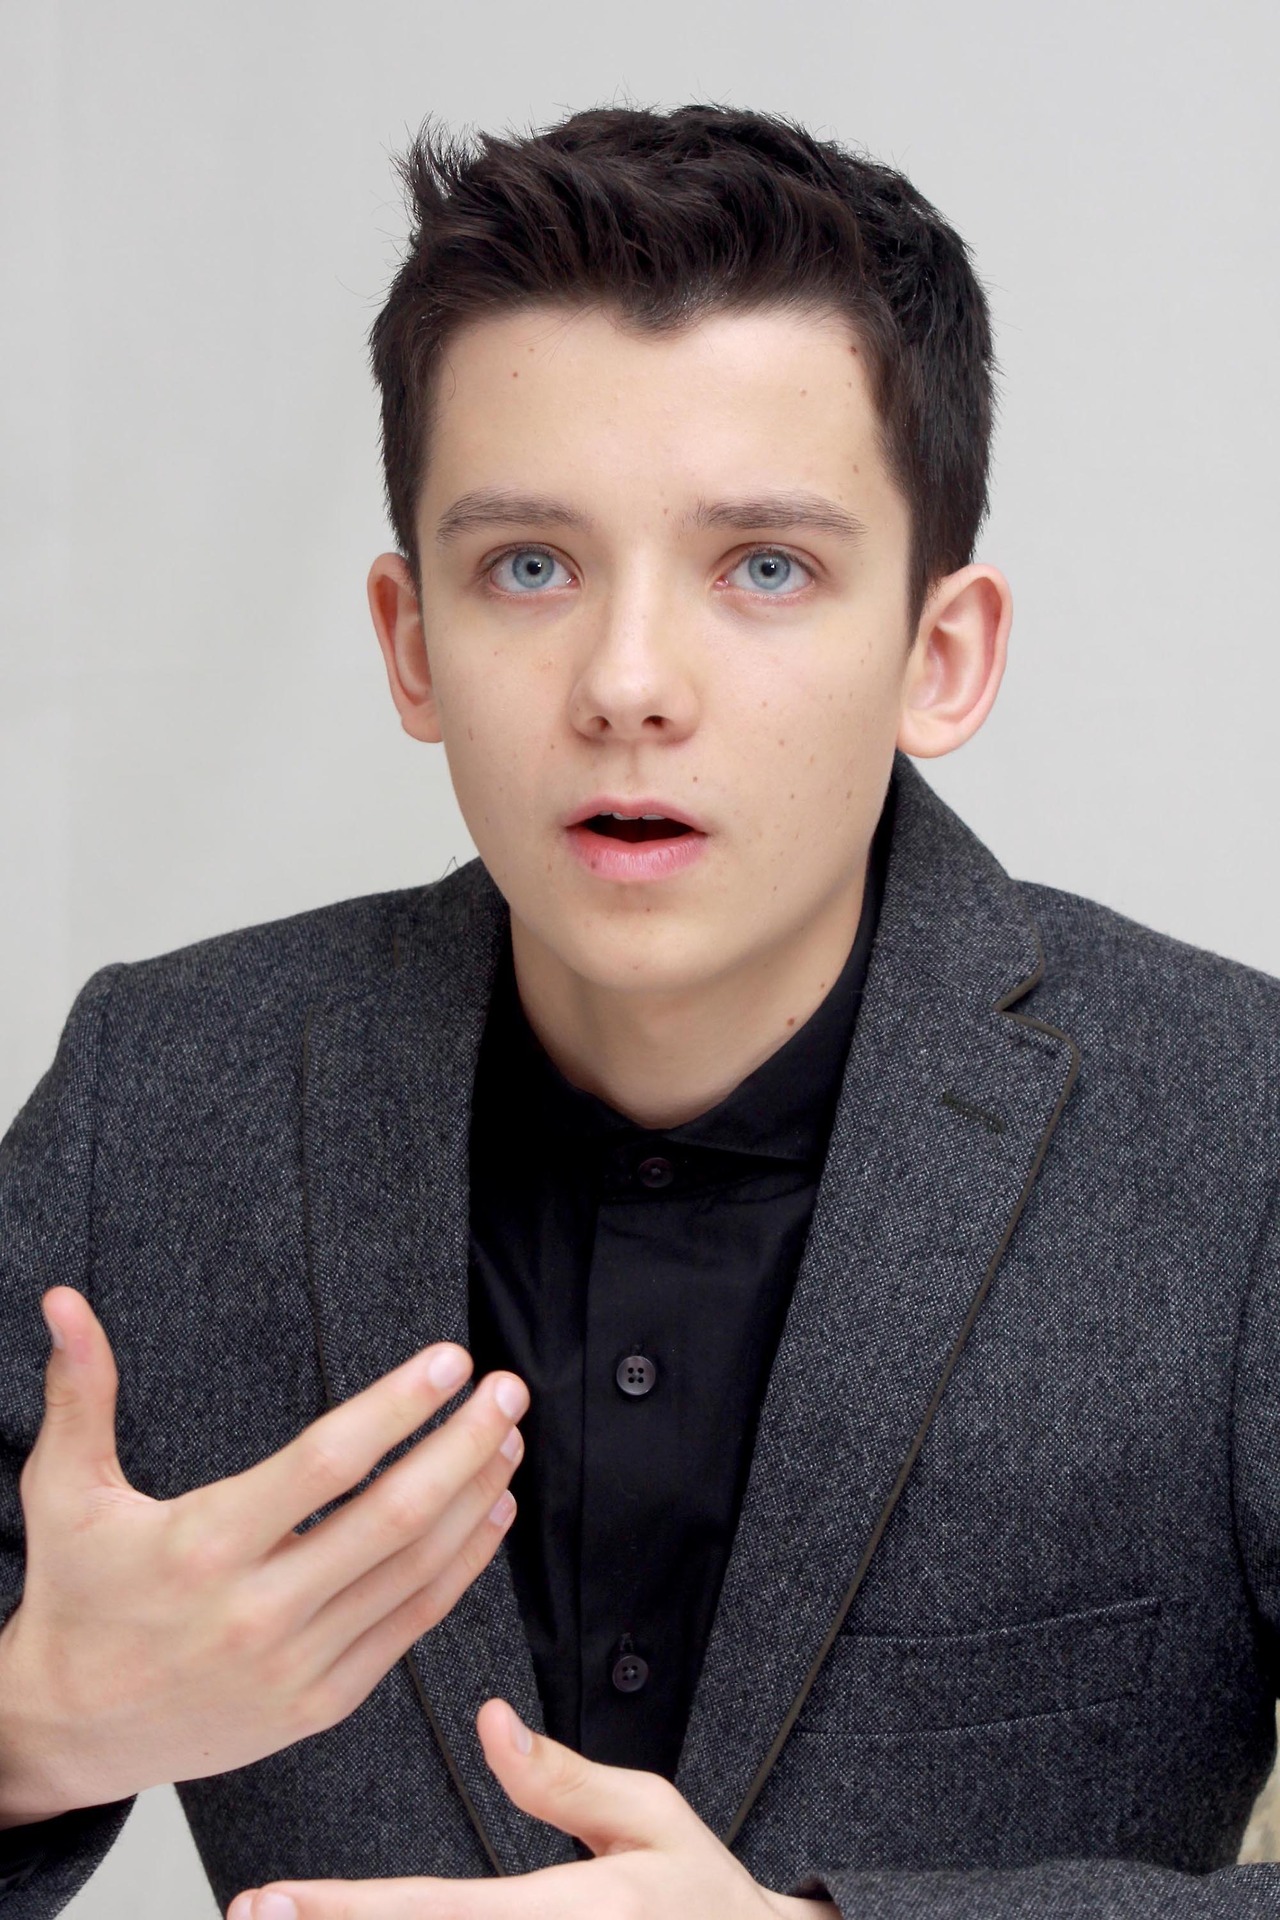 Picture of Asa Butterfield in General Pictures - asa-butterfield ...